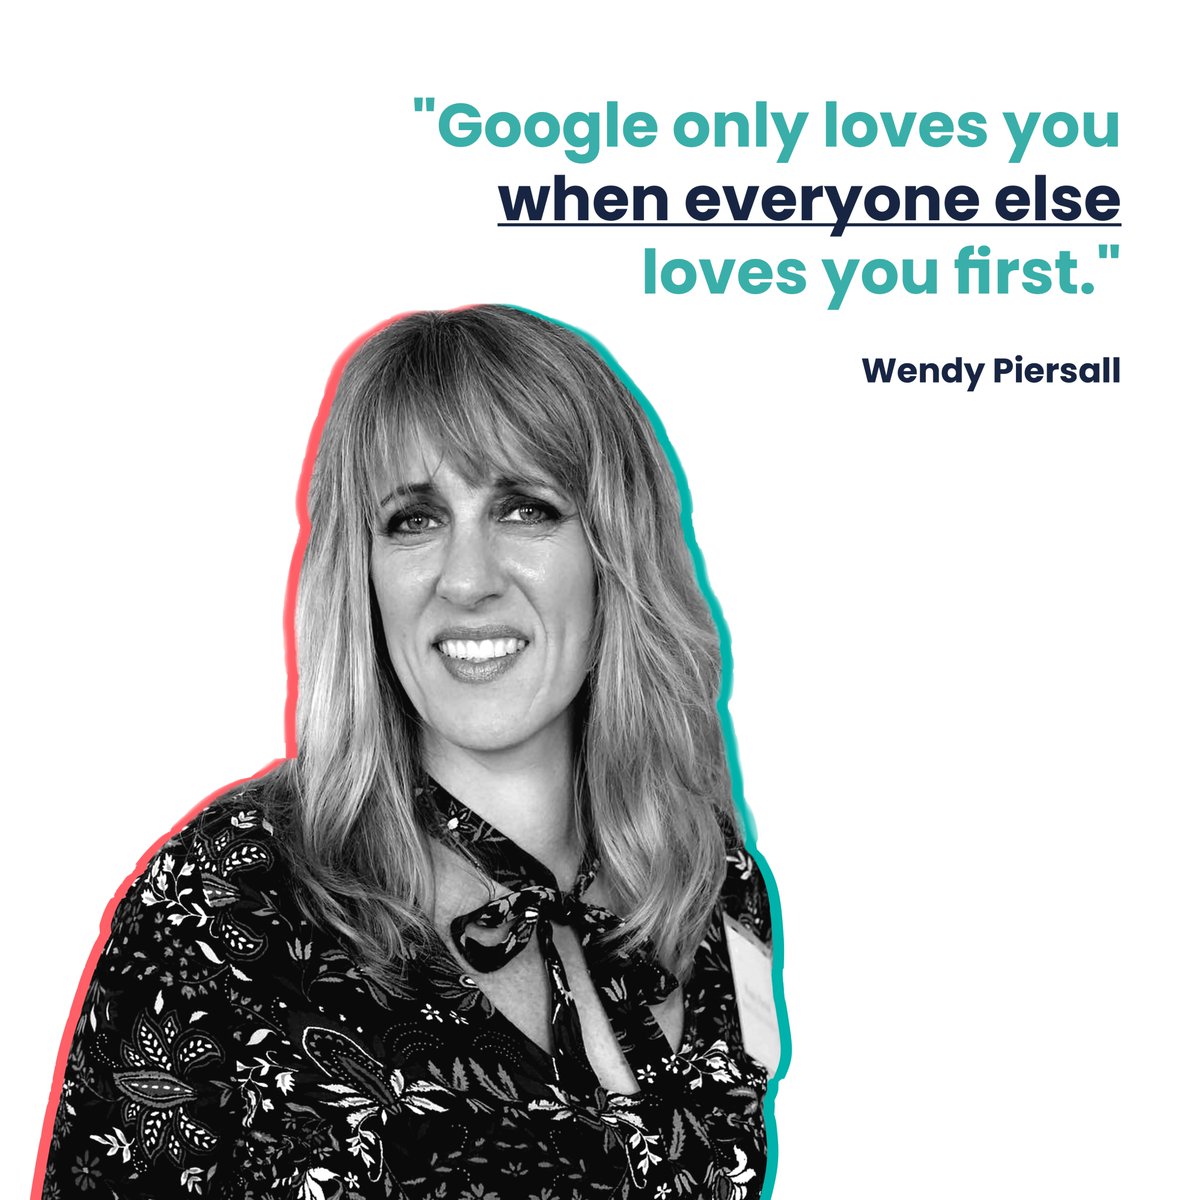 Stay ahead of the game and leverage your online presence! Discover more tips here: bit.ly/3vlIGhv

#GoogleRanking #SEO #schoolmarketing